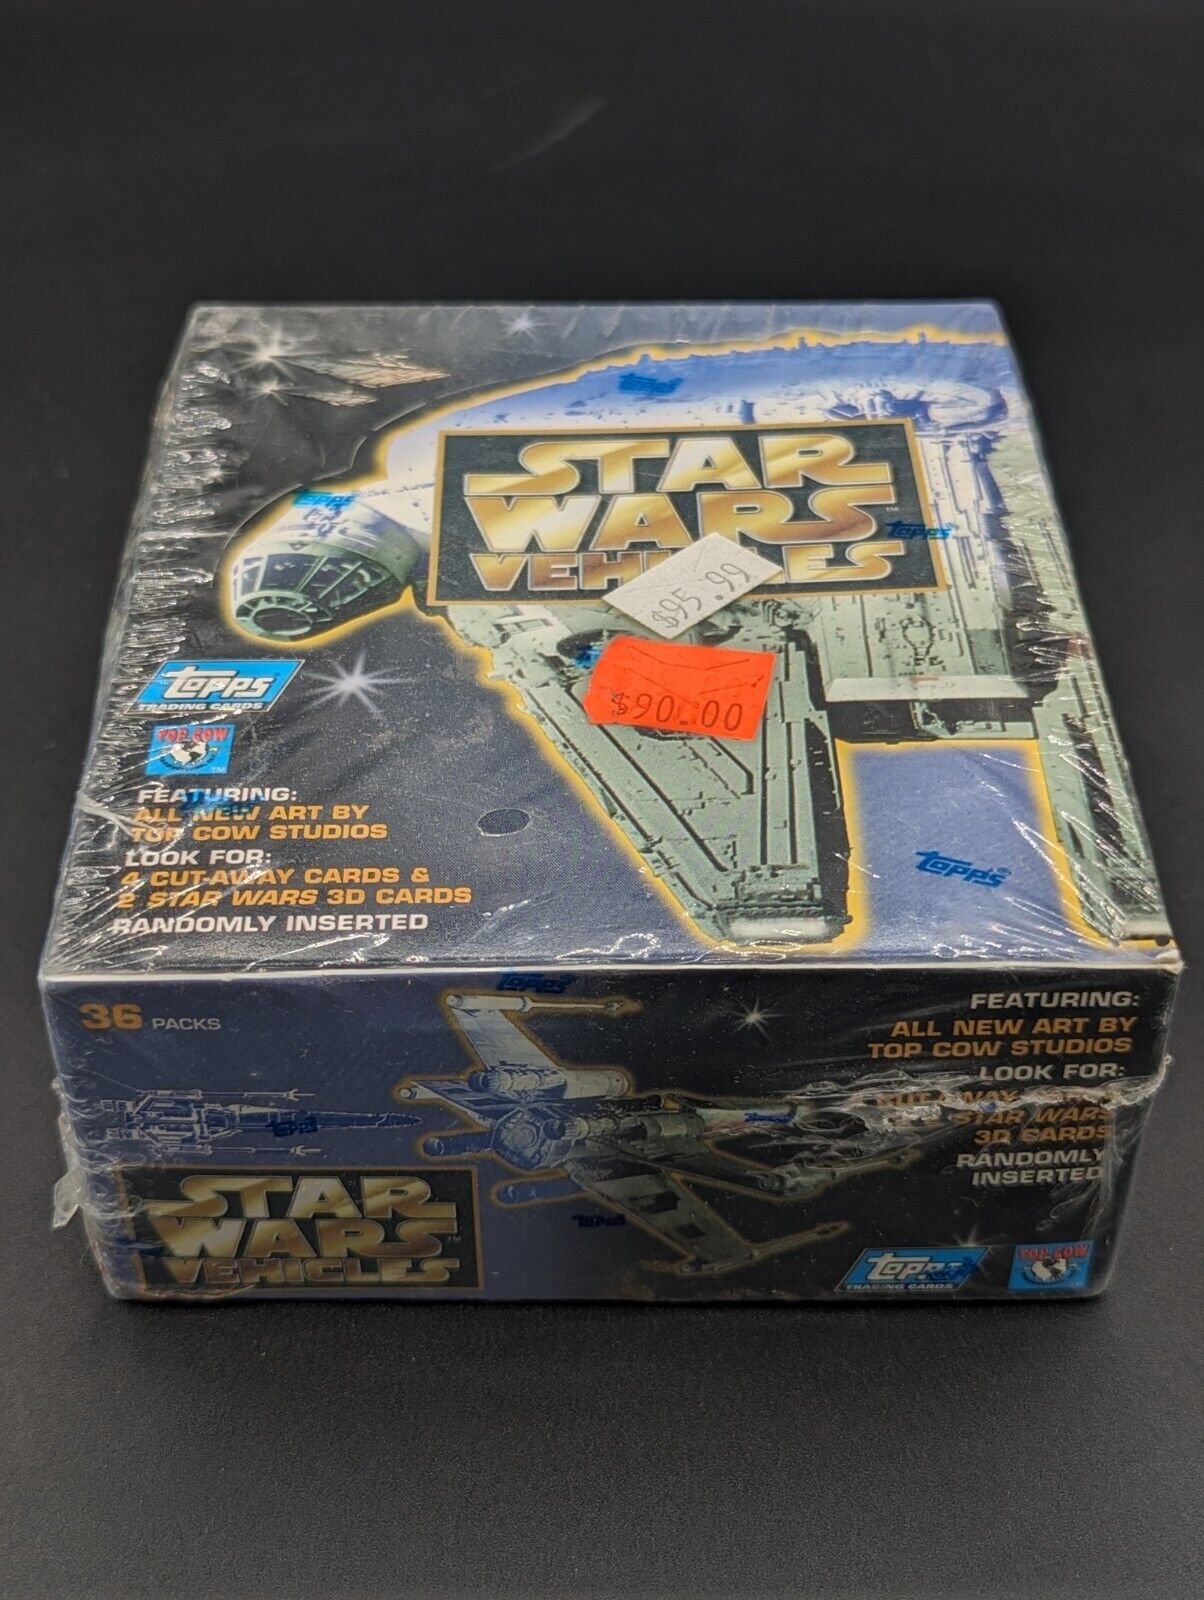 1997 Topps STAR WARS VEHICLES Factory Sealed Box 36 Packs 3-D & Cut-Away Cards